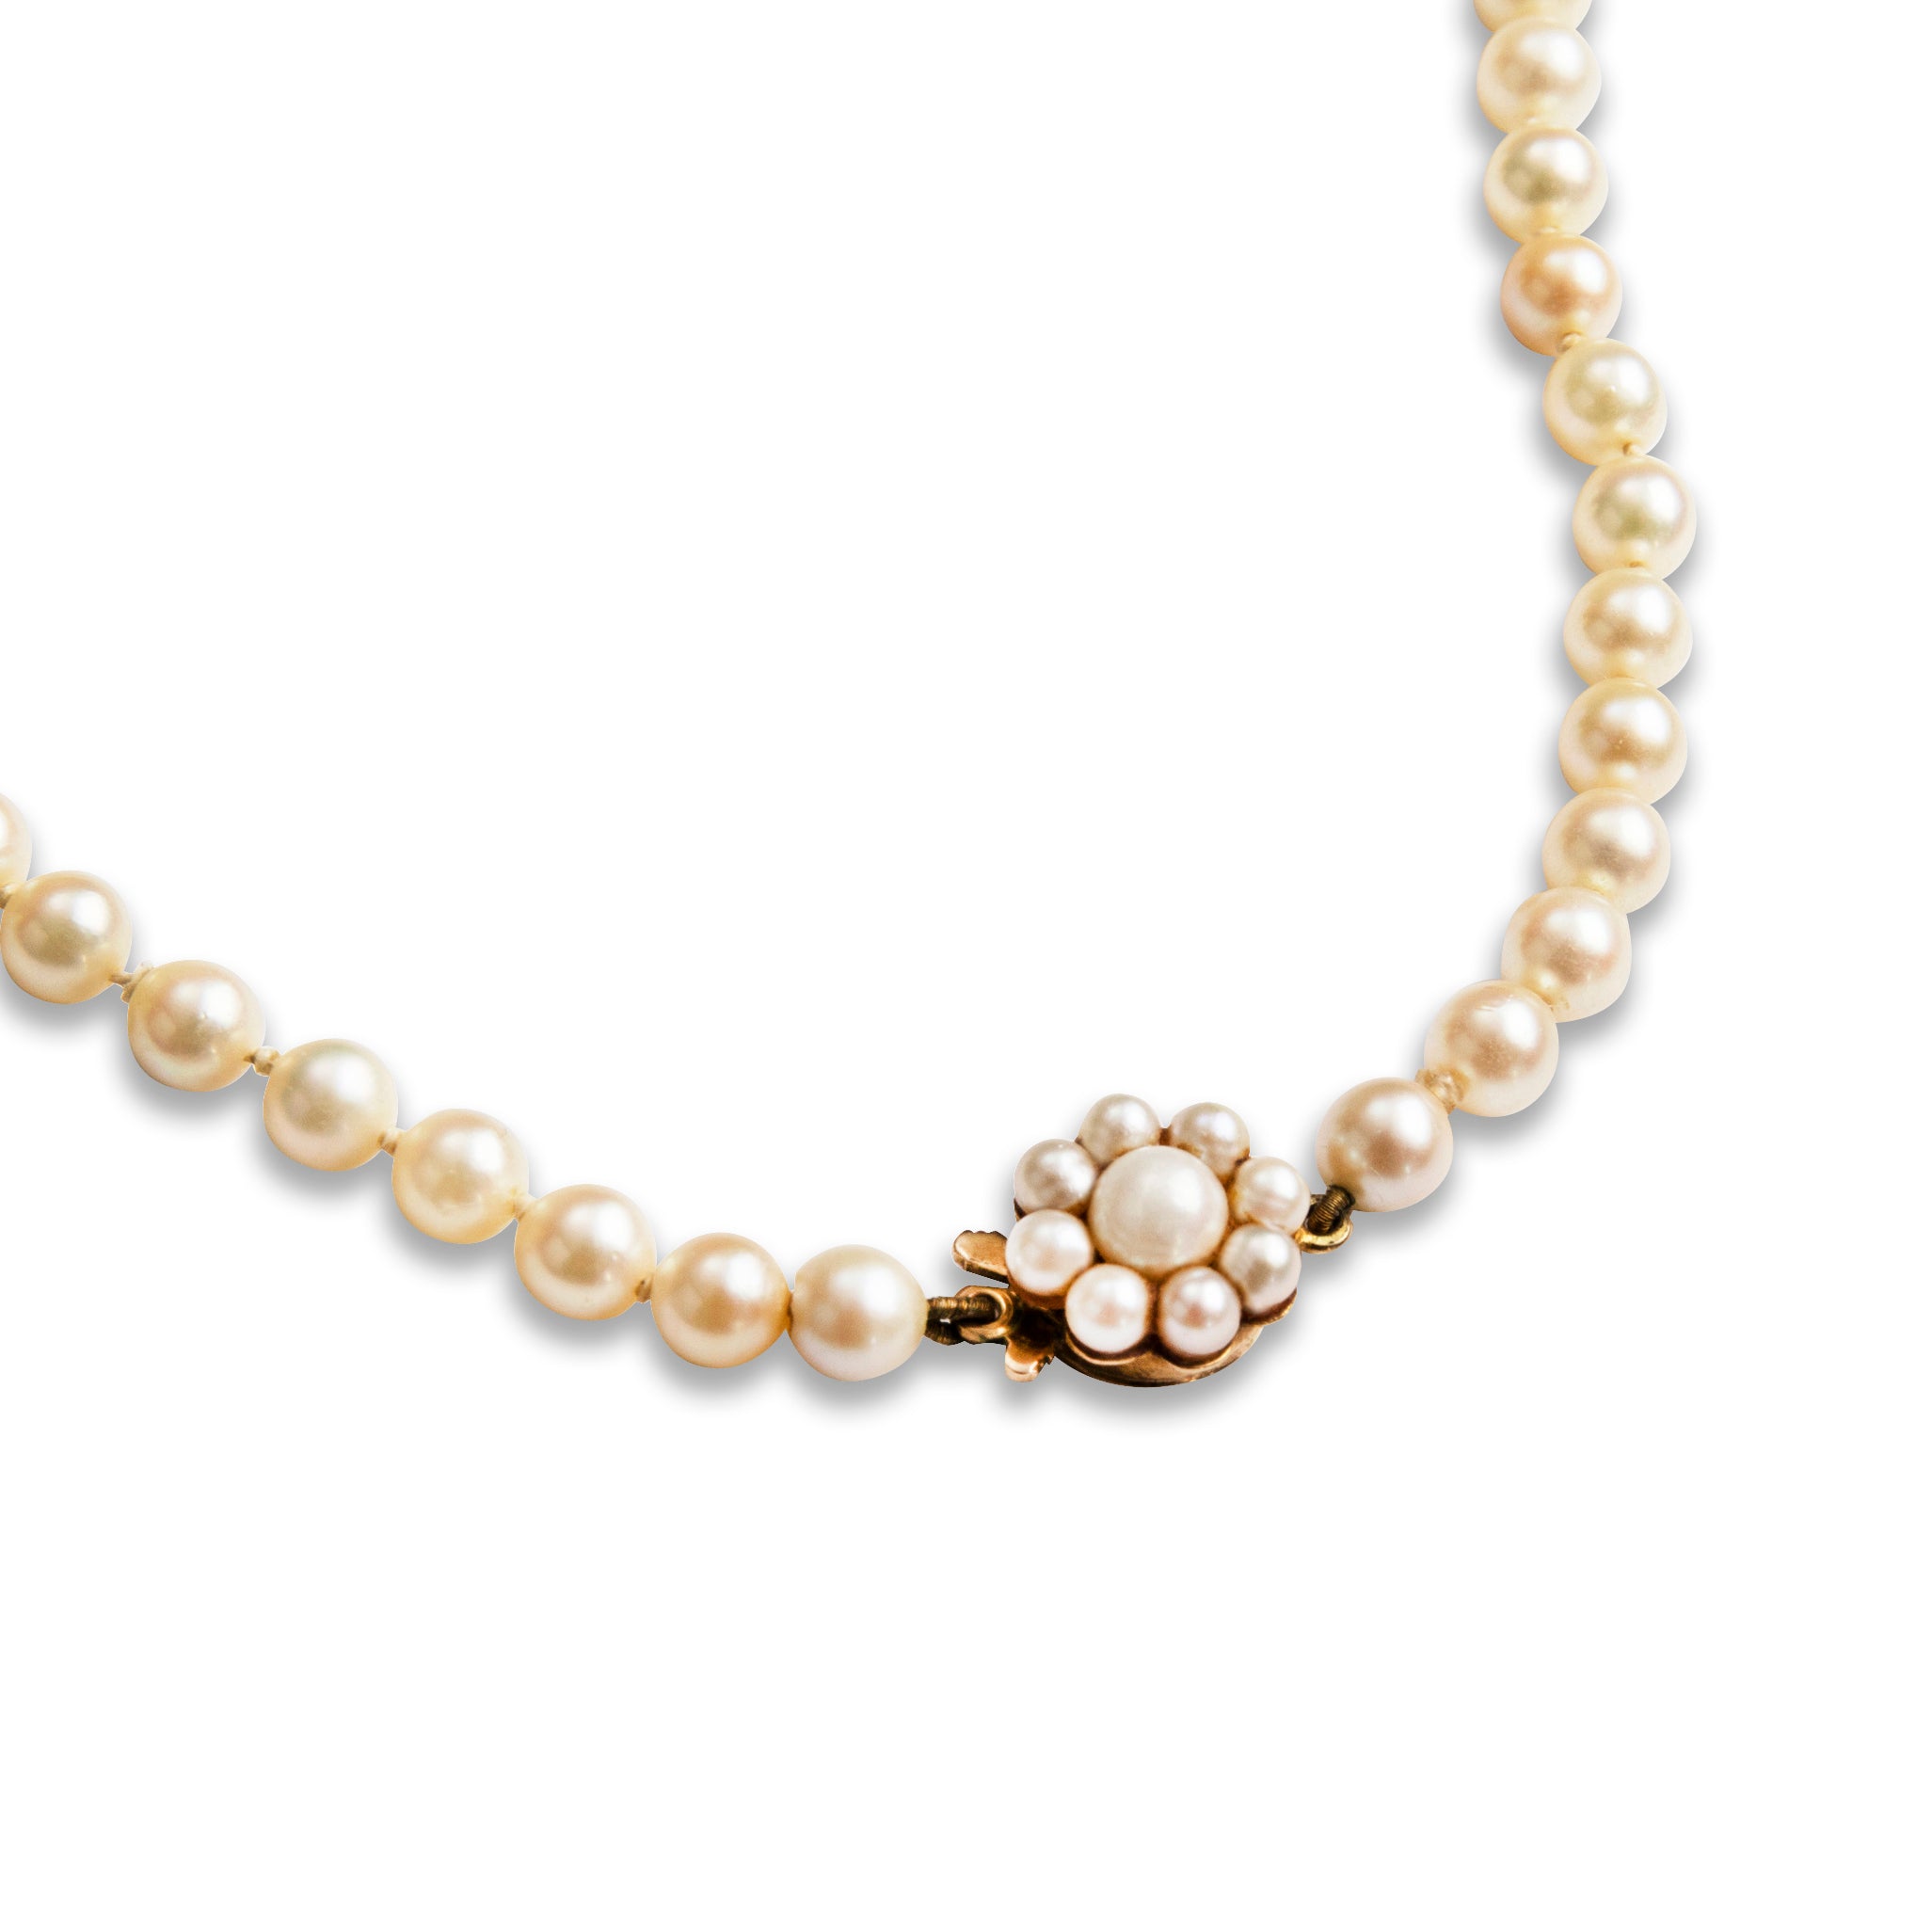 Cultured Pearl Necklace with 9ct Yellow Gold Clasp